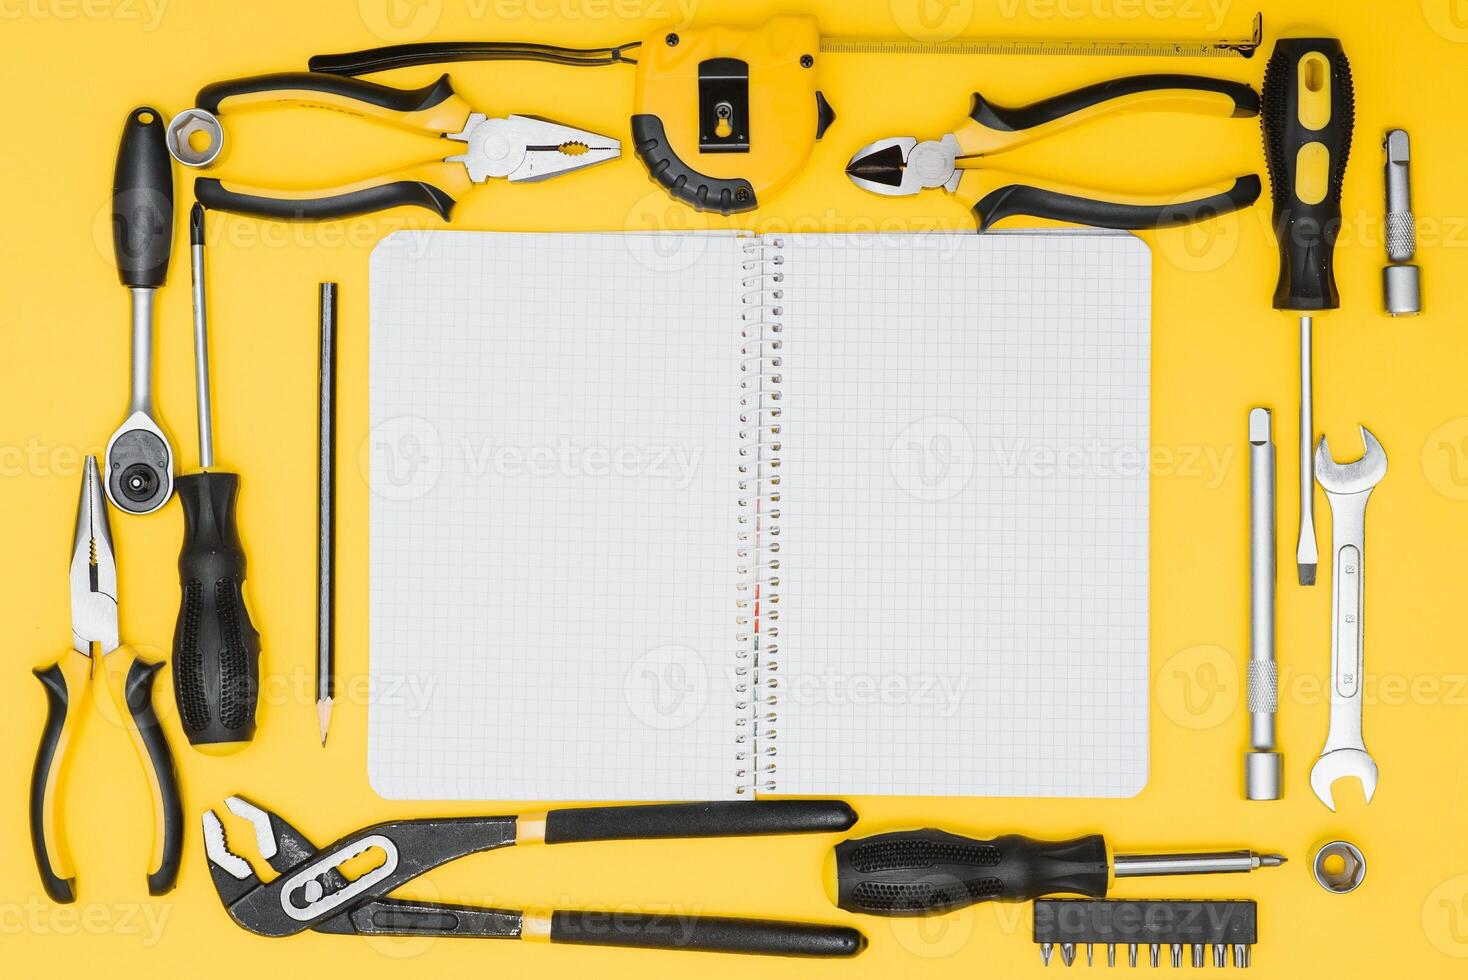 Set of various construction tools. Tools for home repair. Work at a construction site. On a yellow background. Flatly. Flatlay photo